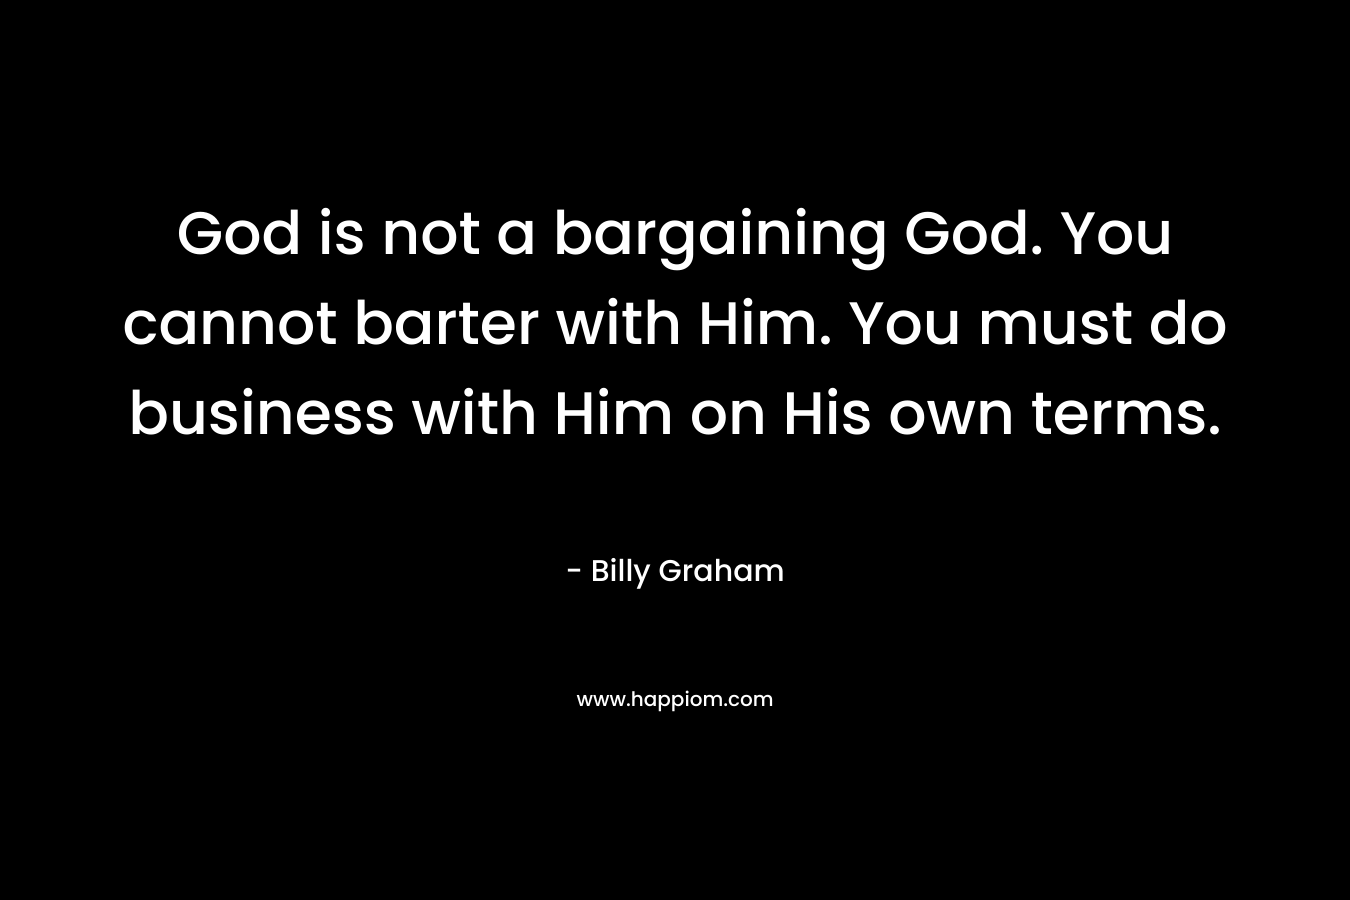 God is not a bargaining God. You cannot barter with Him. You must do business with Him on His own terms.